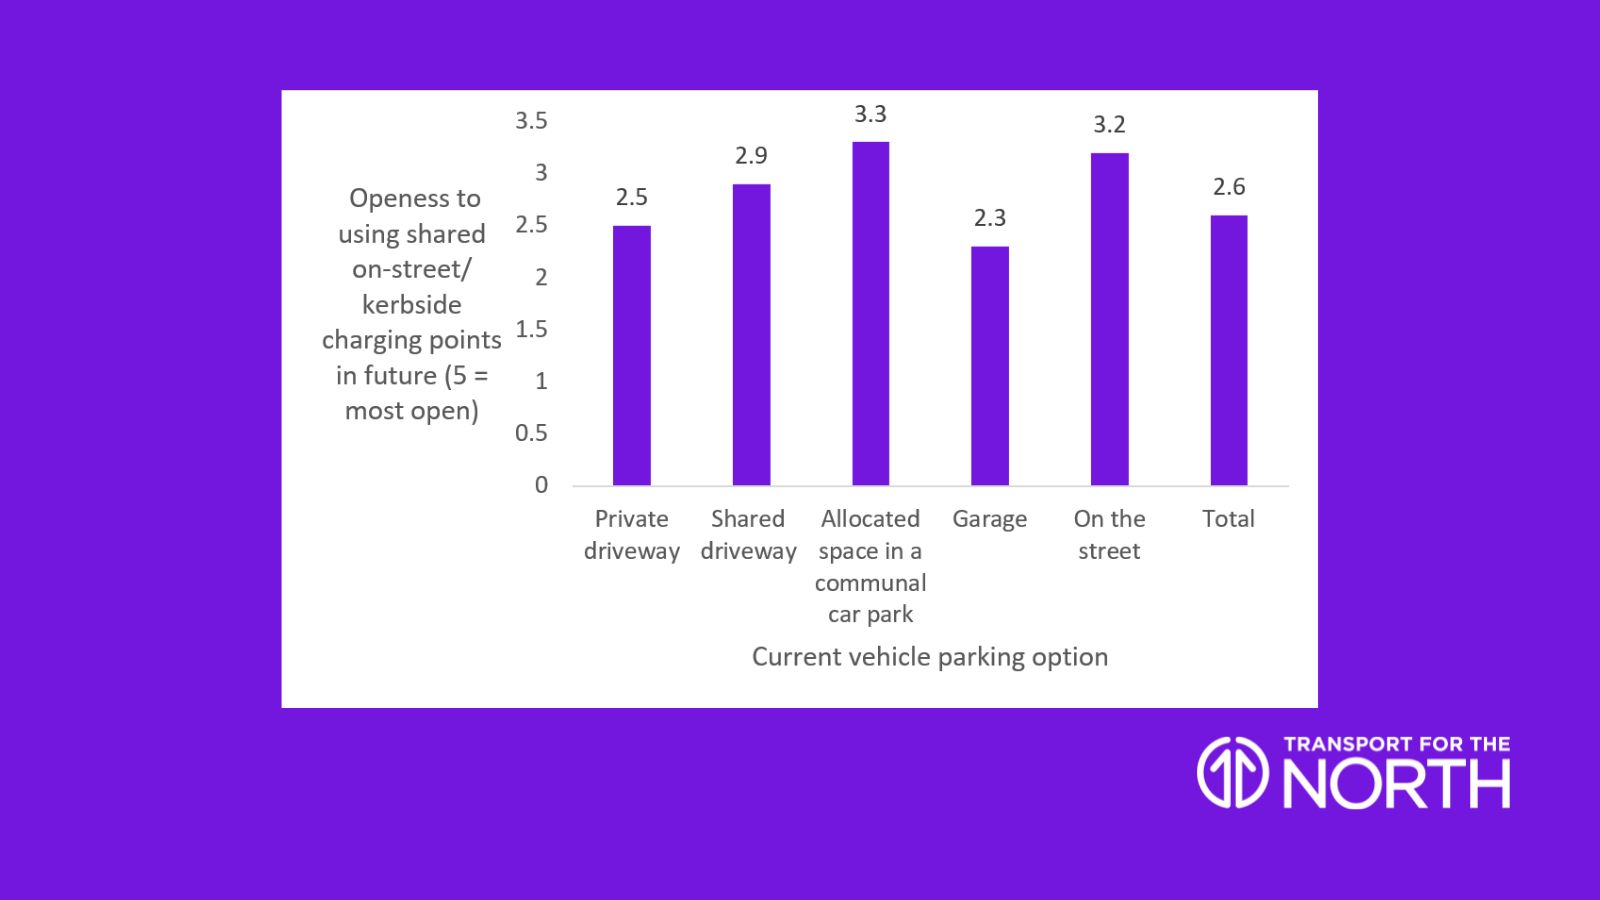 Consumer attitudes to shared on-street/kerbside charging points